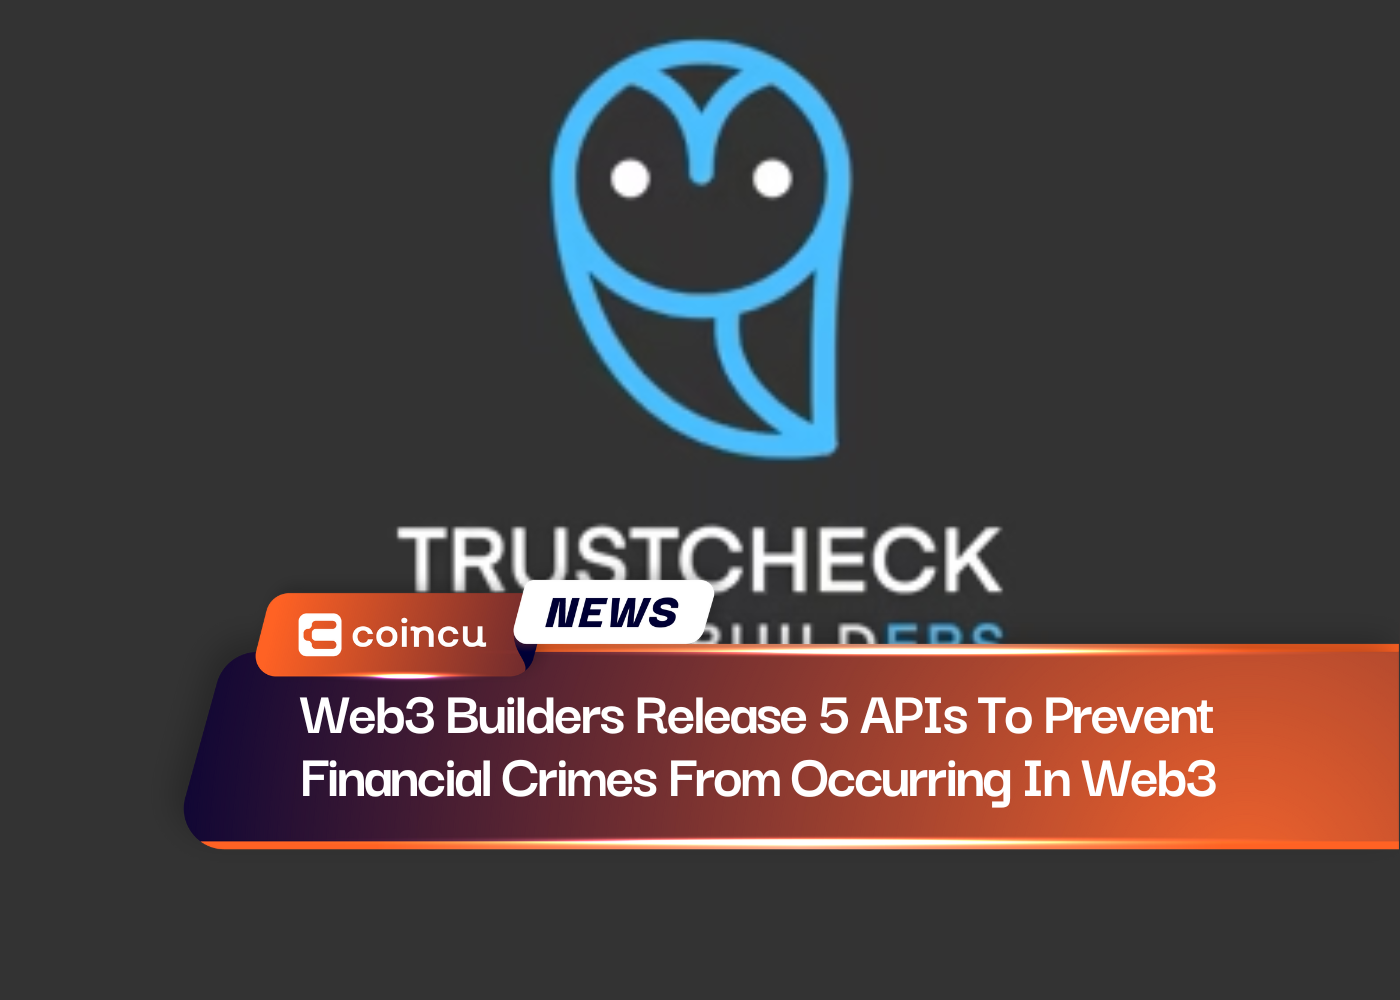 Web3 Builders Release 5 APIs To Prevent Financial Crimes From Occurring In Web3